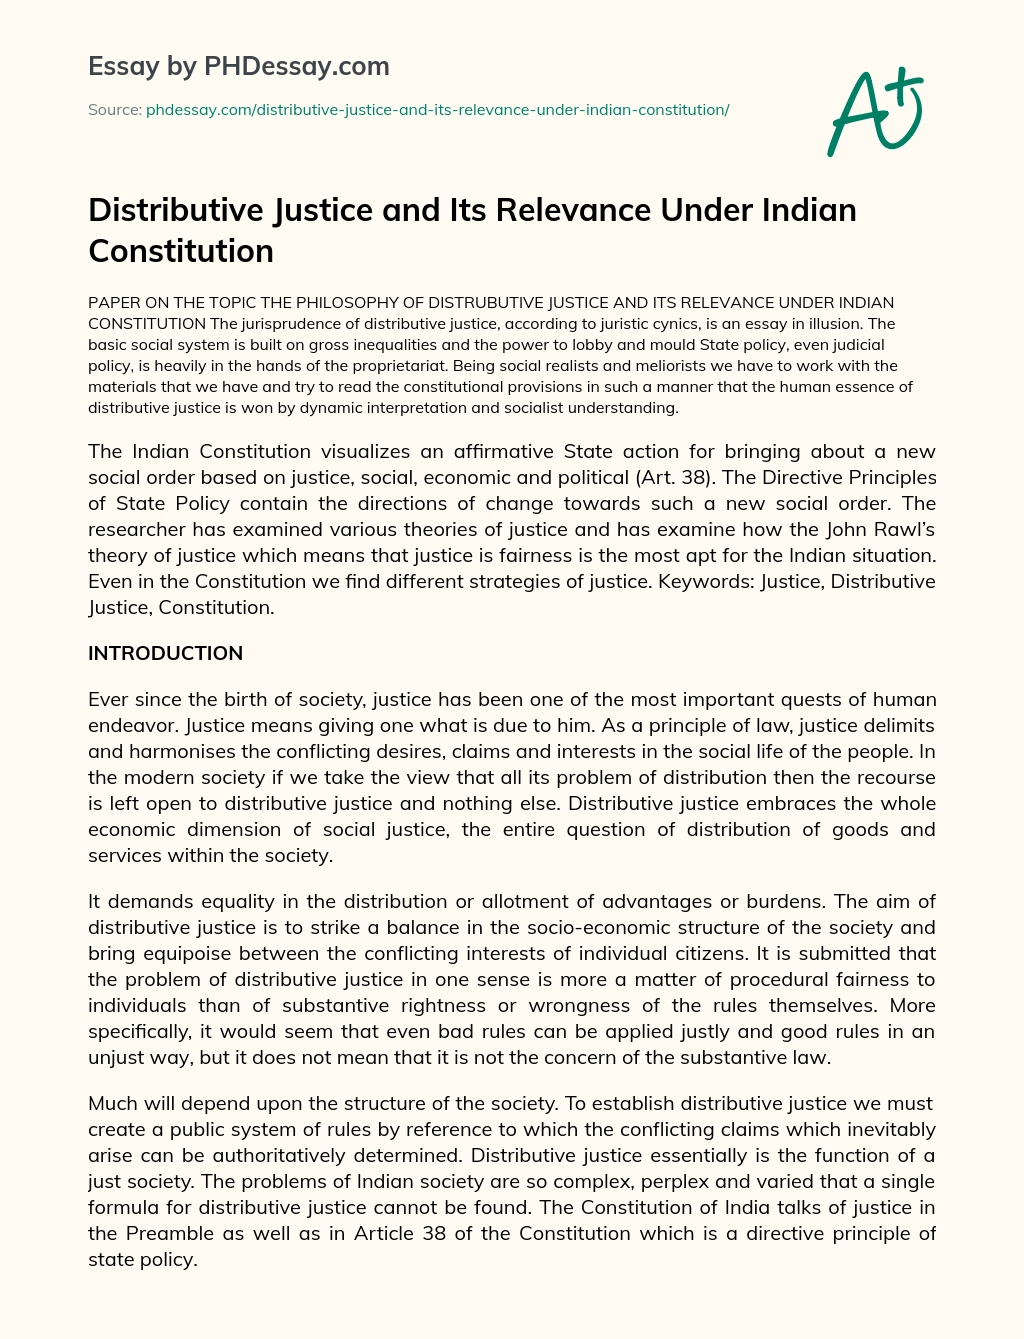 Distributive Justice and Its Relevance Under Indian Constitution essay